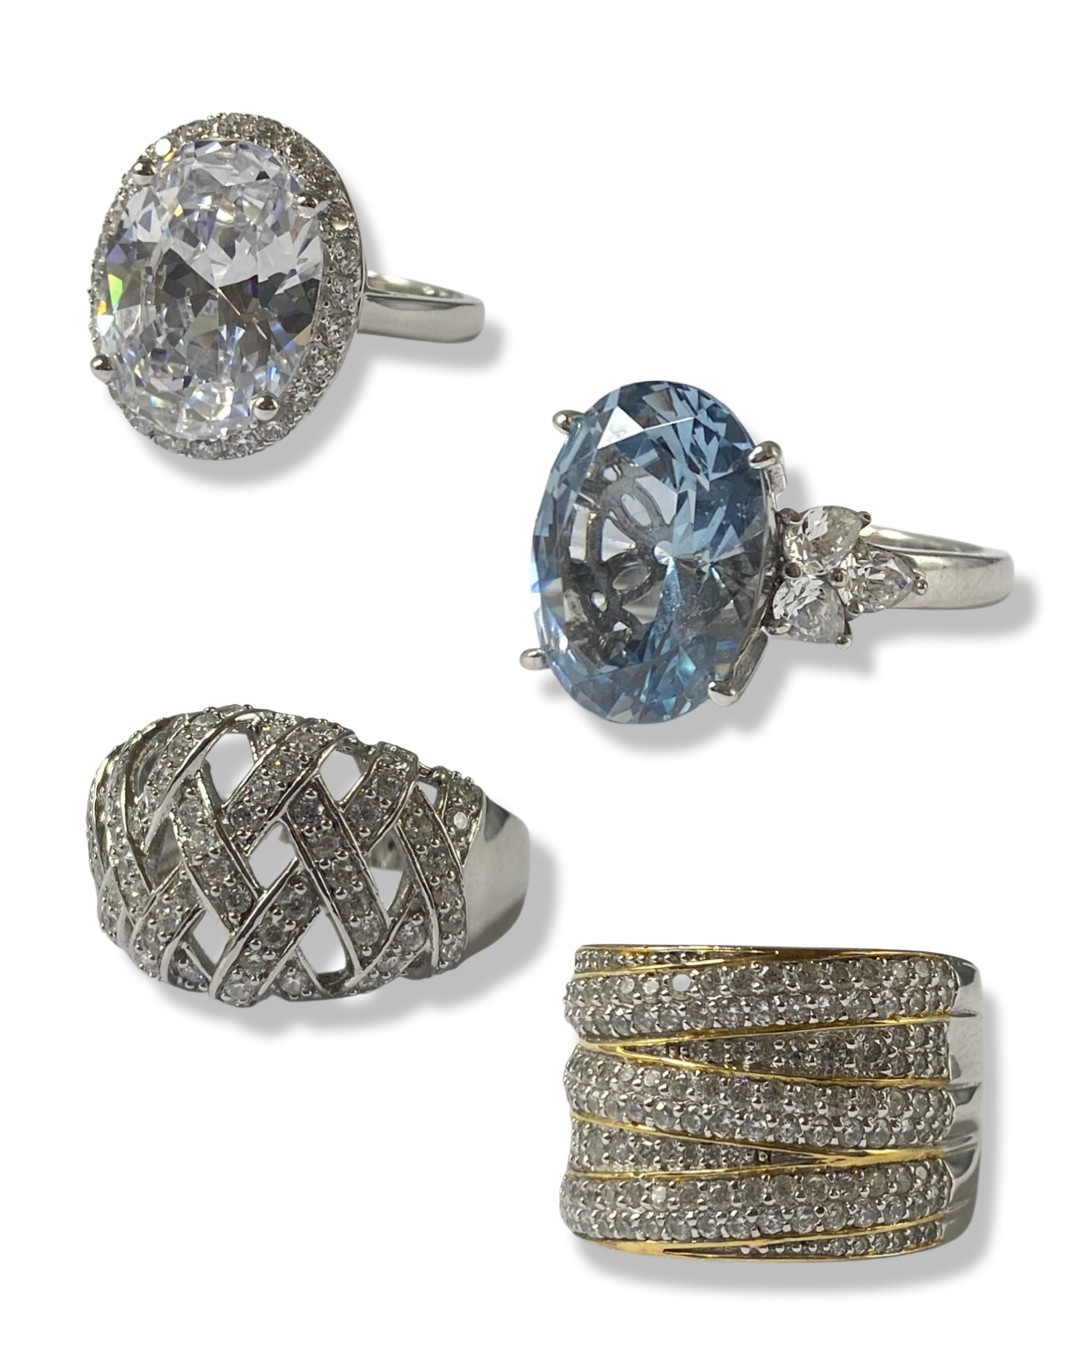 Collection of four boxed silver statement rings all set with different stones and in different